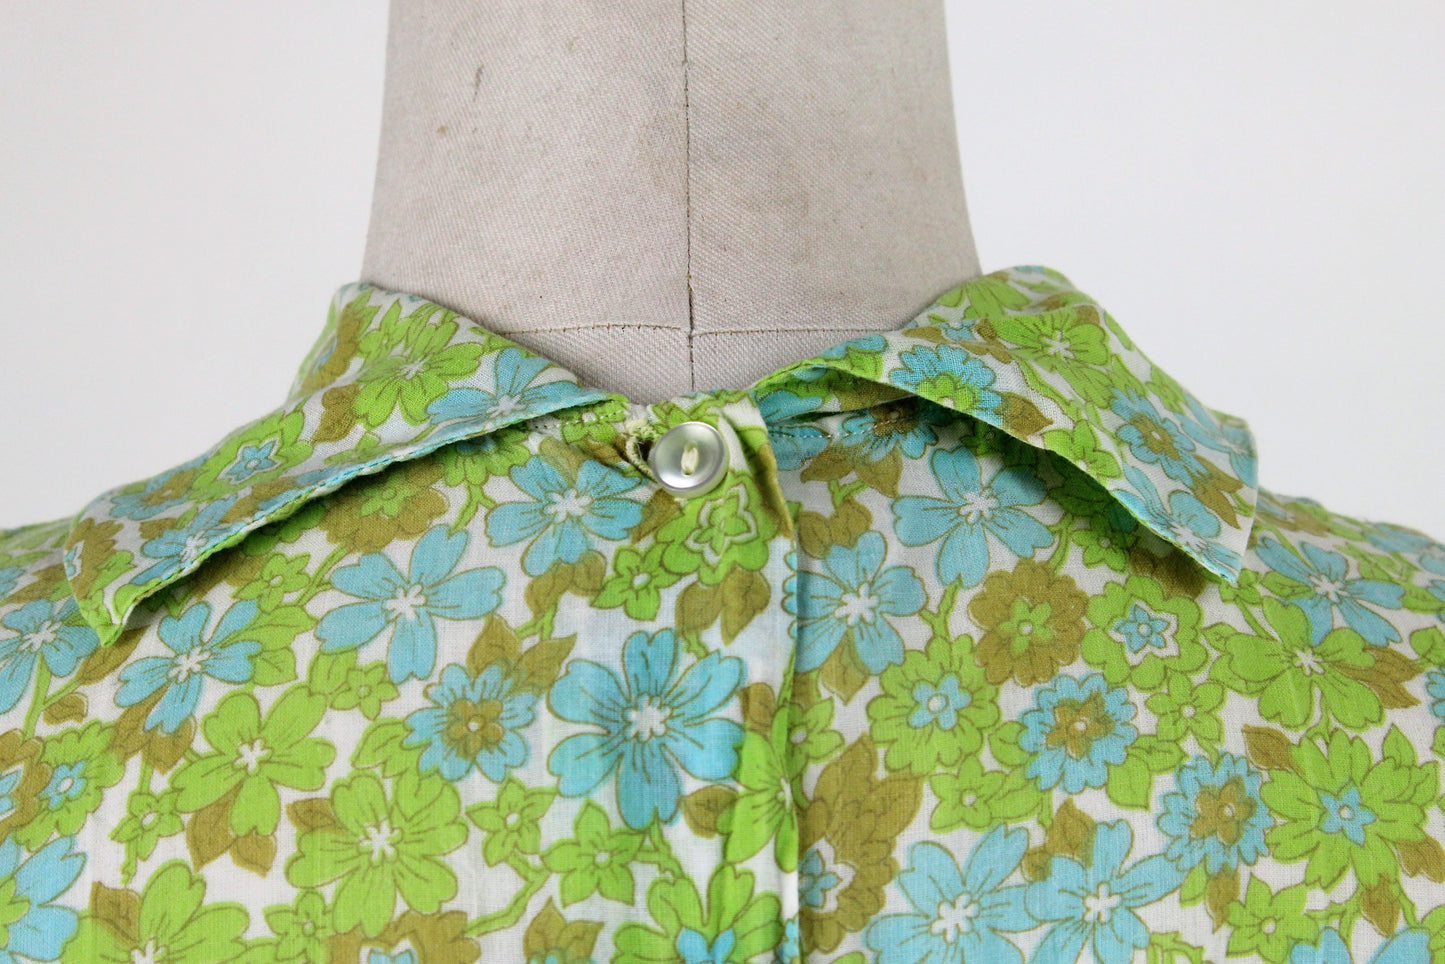 Vintage 1960s Floral Blouse by Melray